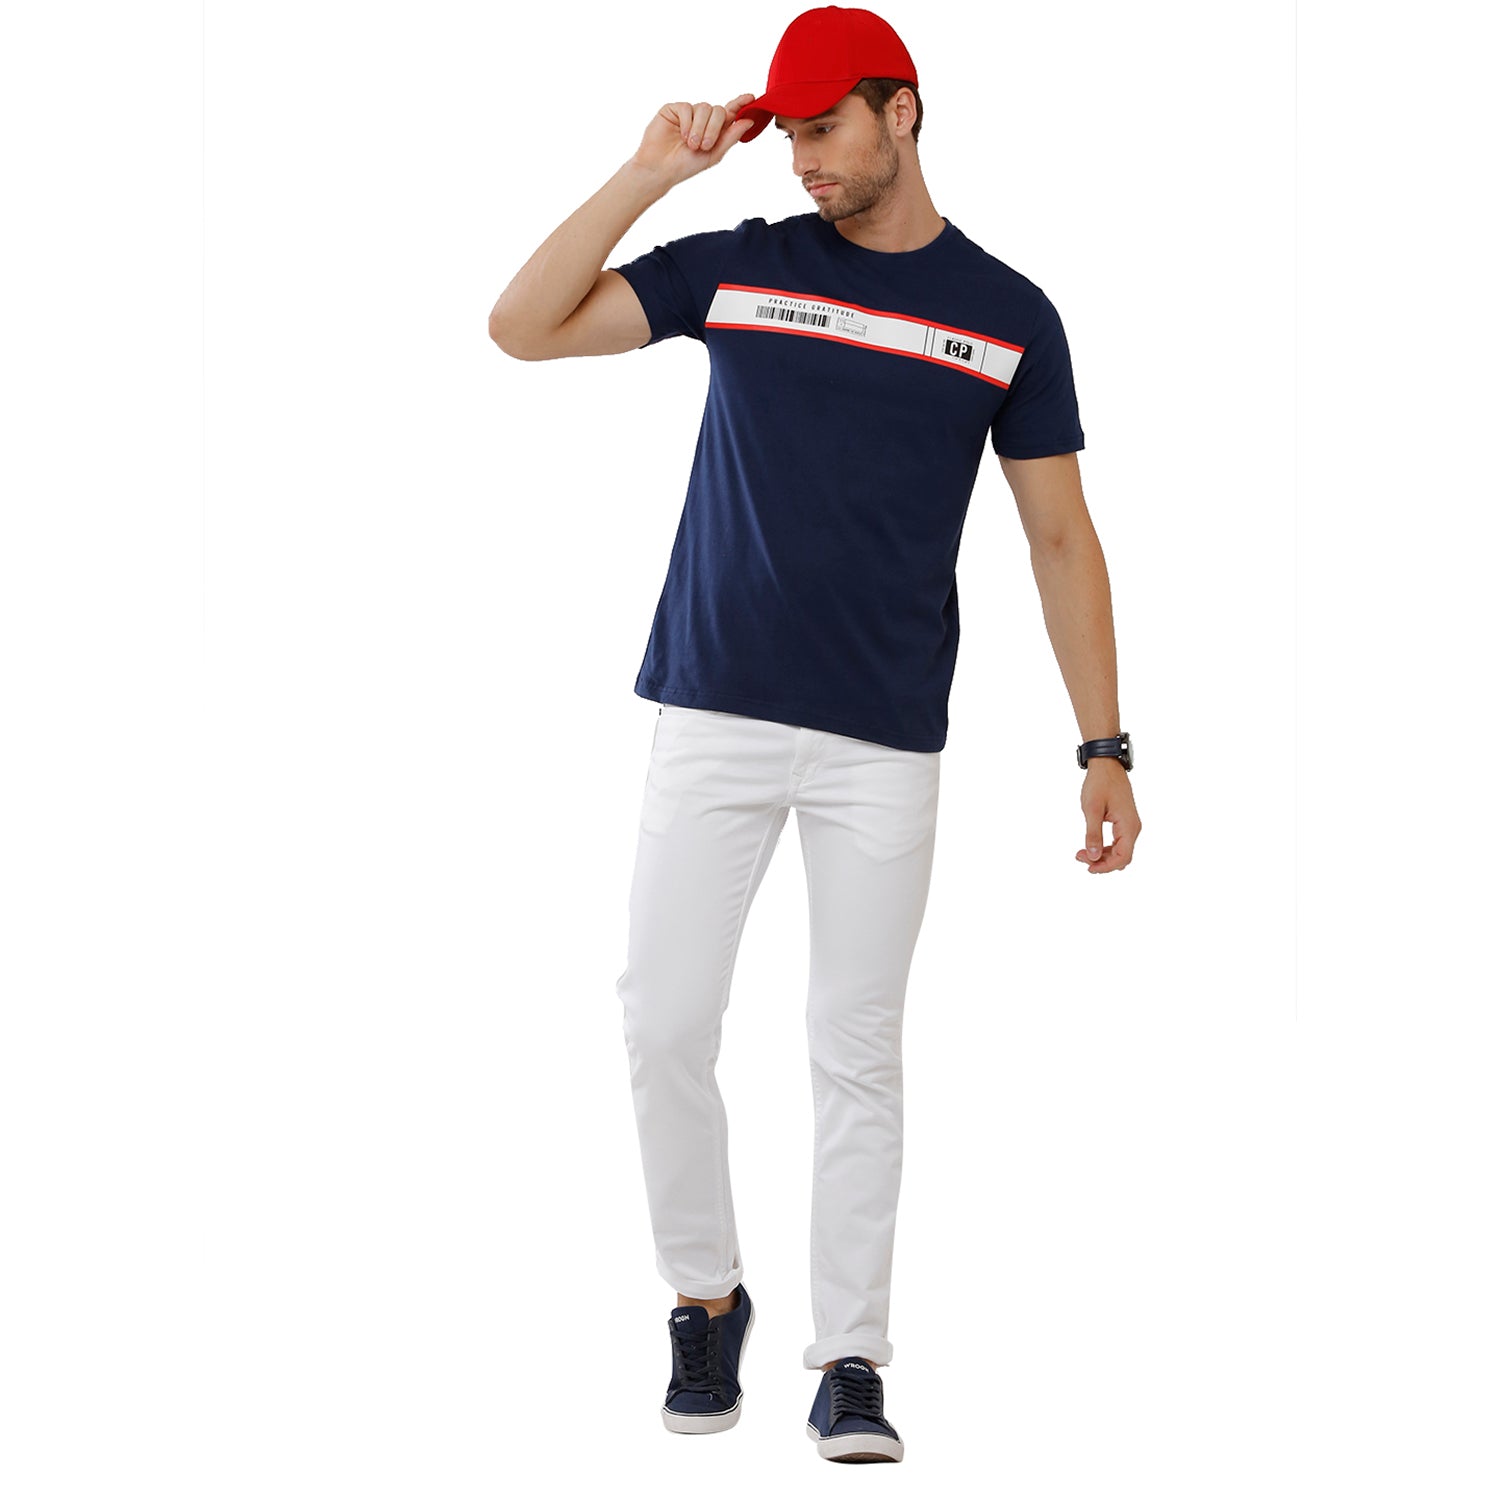 Classic Polo Men's Graphic Print Half Sleeve Round Neck Slim Fit Cotton T Shirt BALENO - 409 A SF C T-shirt Classic Polo 